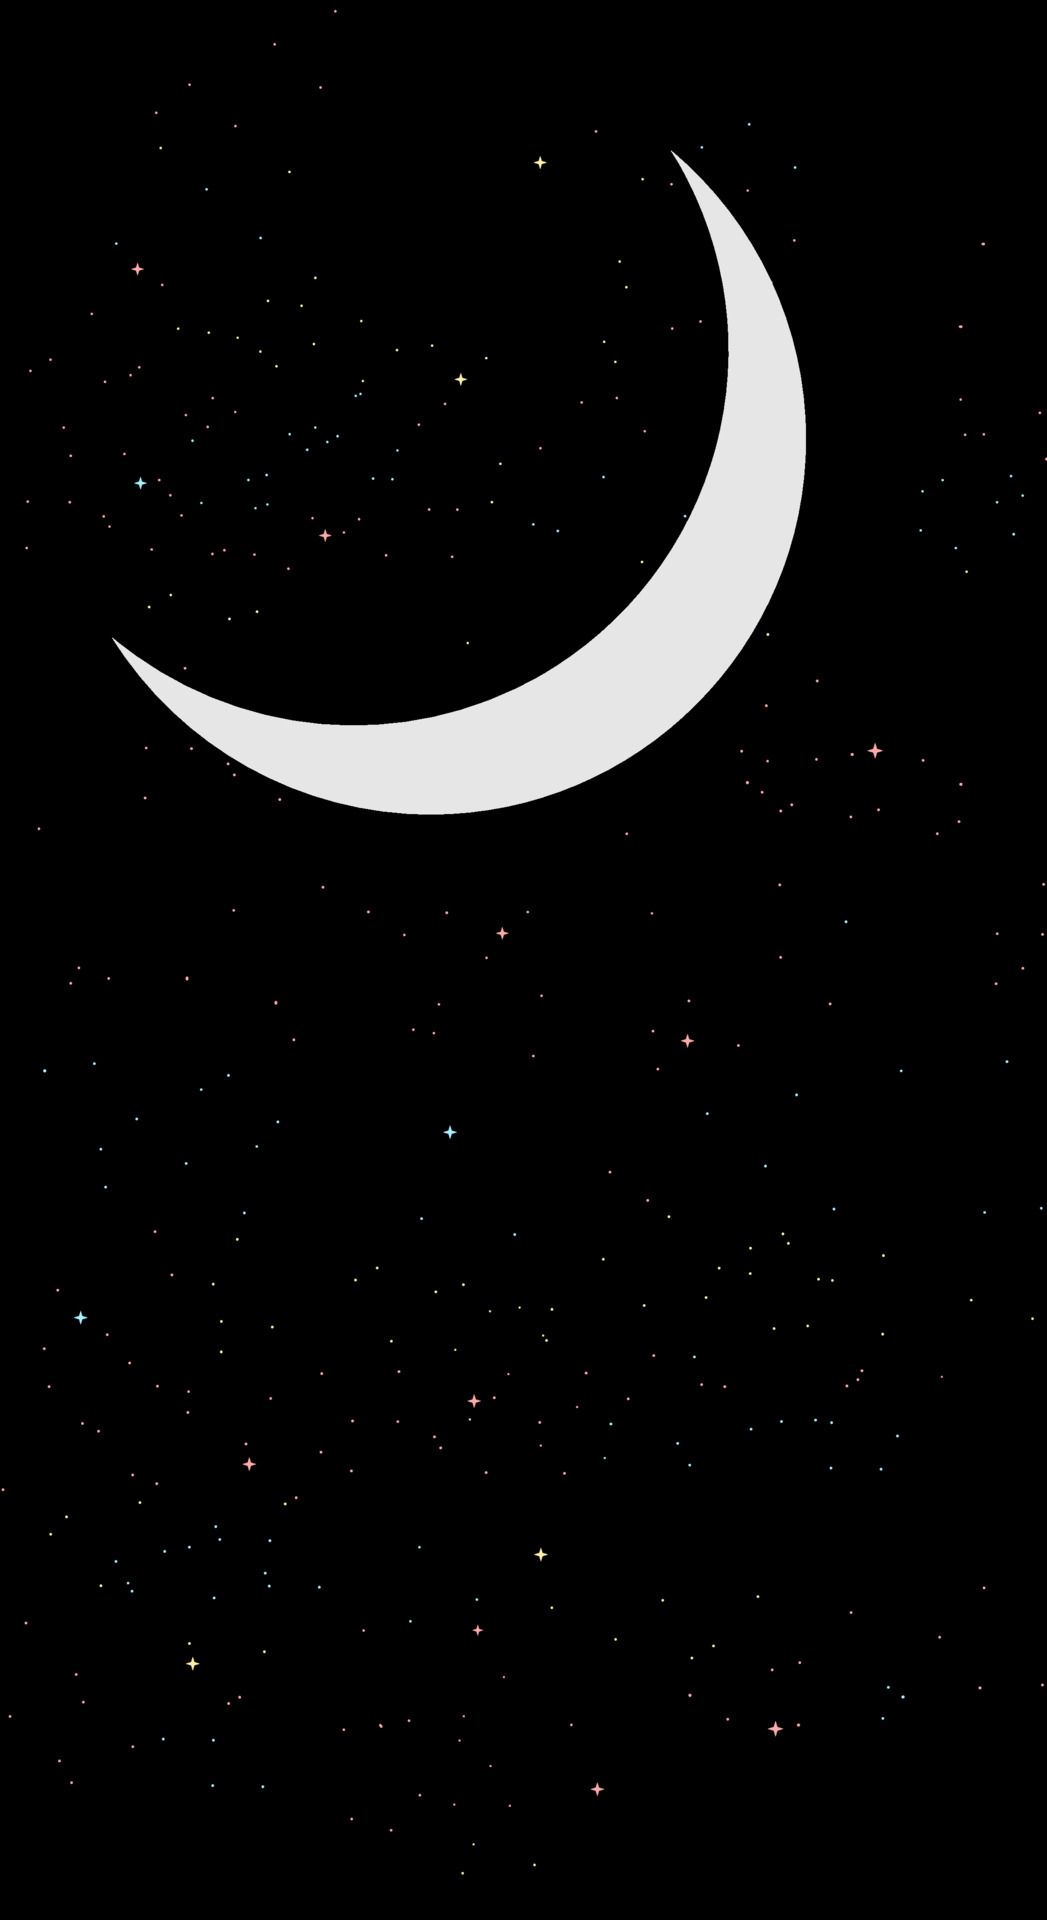 Galaxy illustration in flat style with design moon and stars in night view. Aesthetic and beautiful dark background. Banner for mobile phone screen saver theme, lock screen and wallpaper. Vector